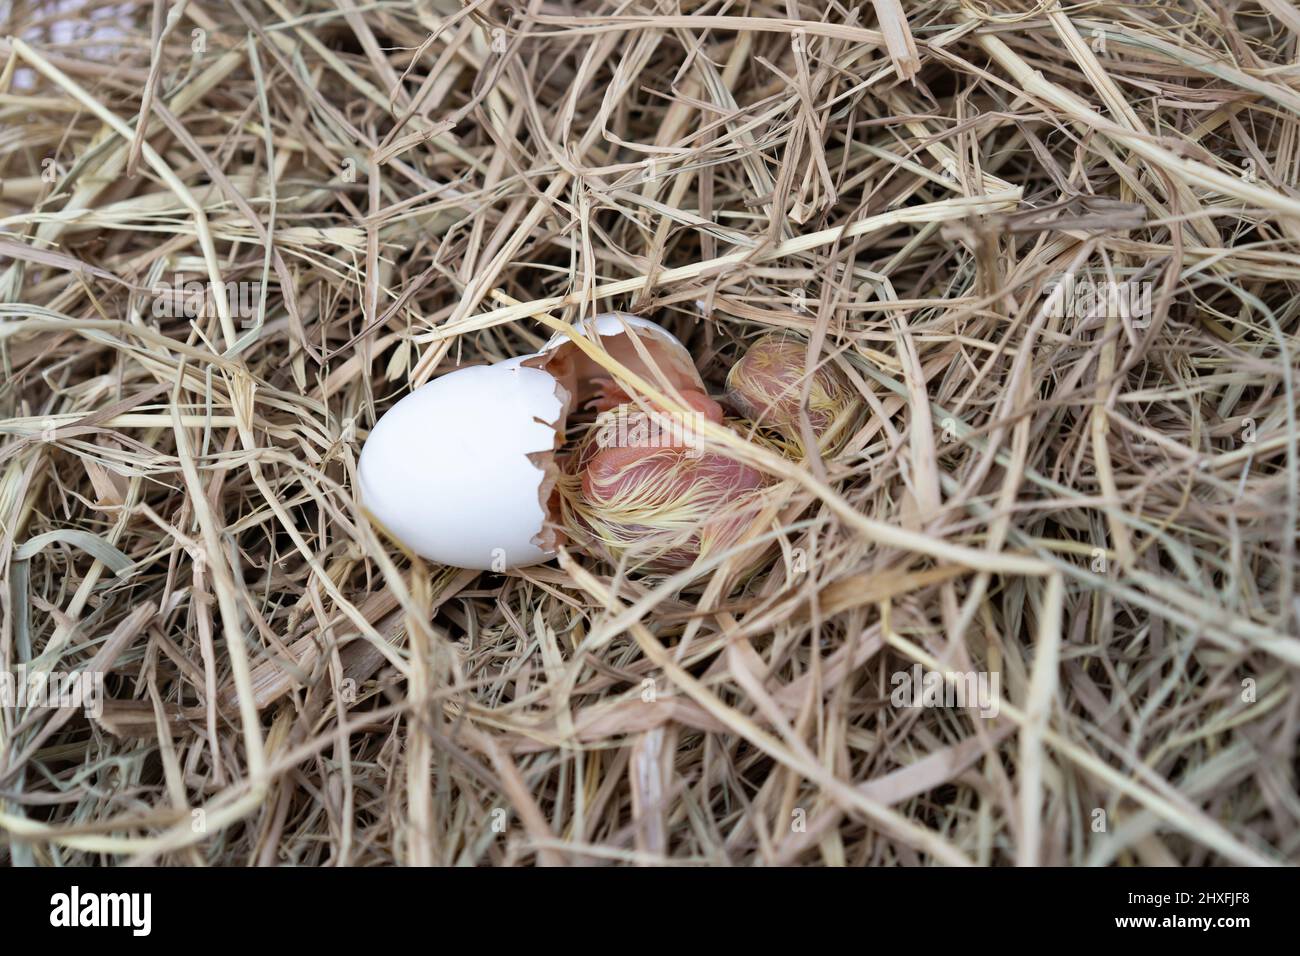 The Leghorn chick newborn was hatched from an egg in the nest. Stock Photo